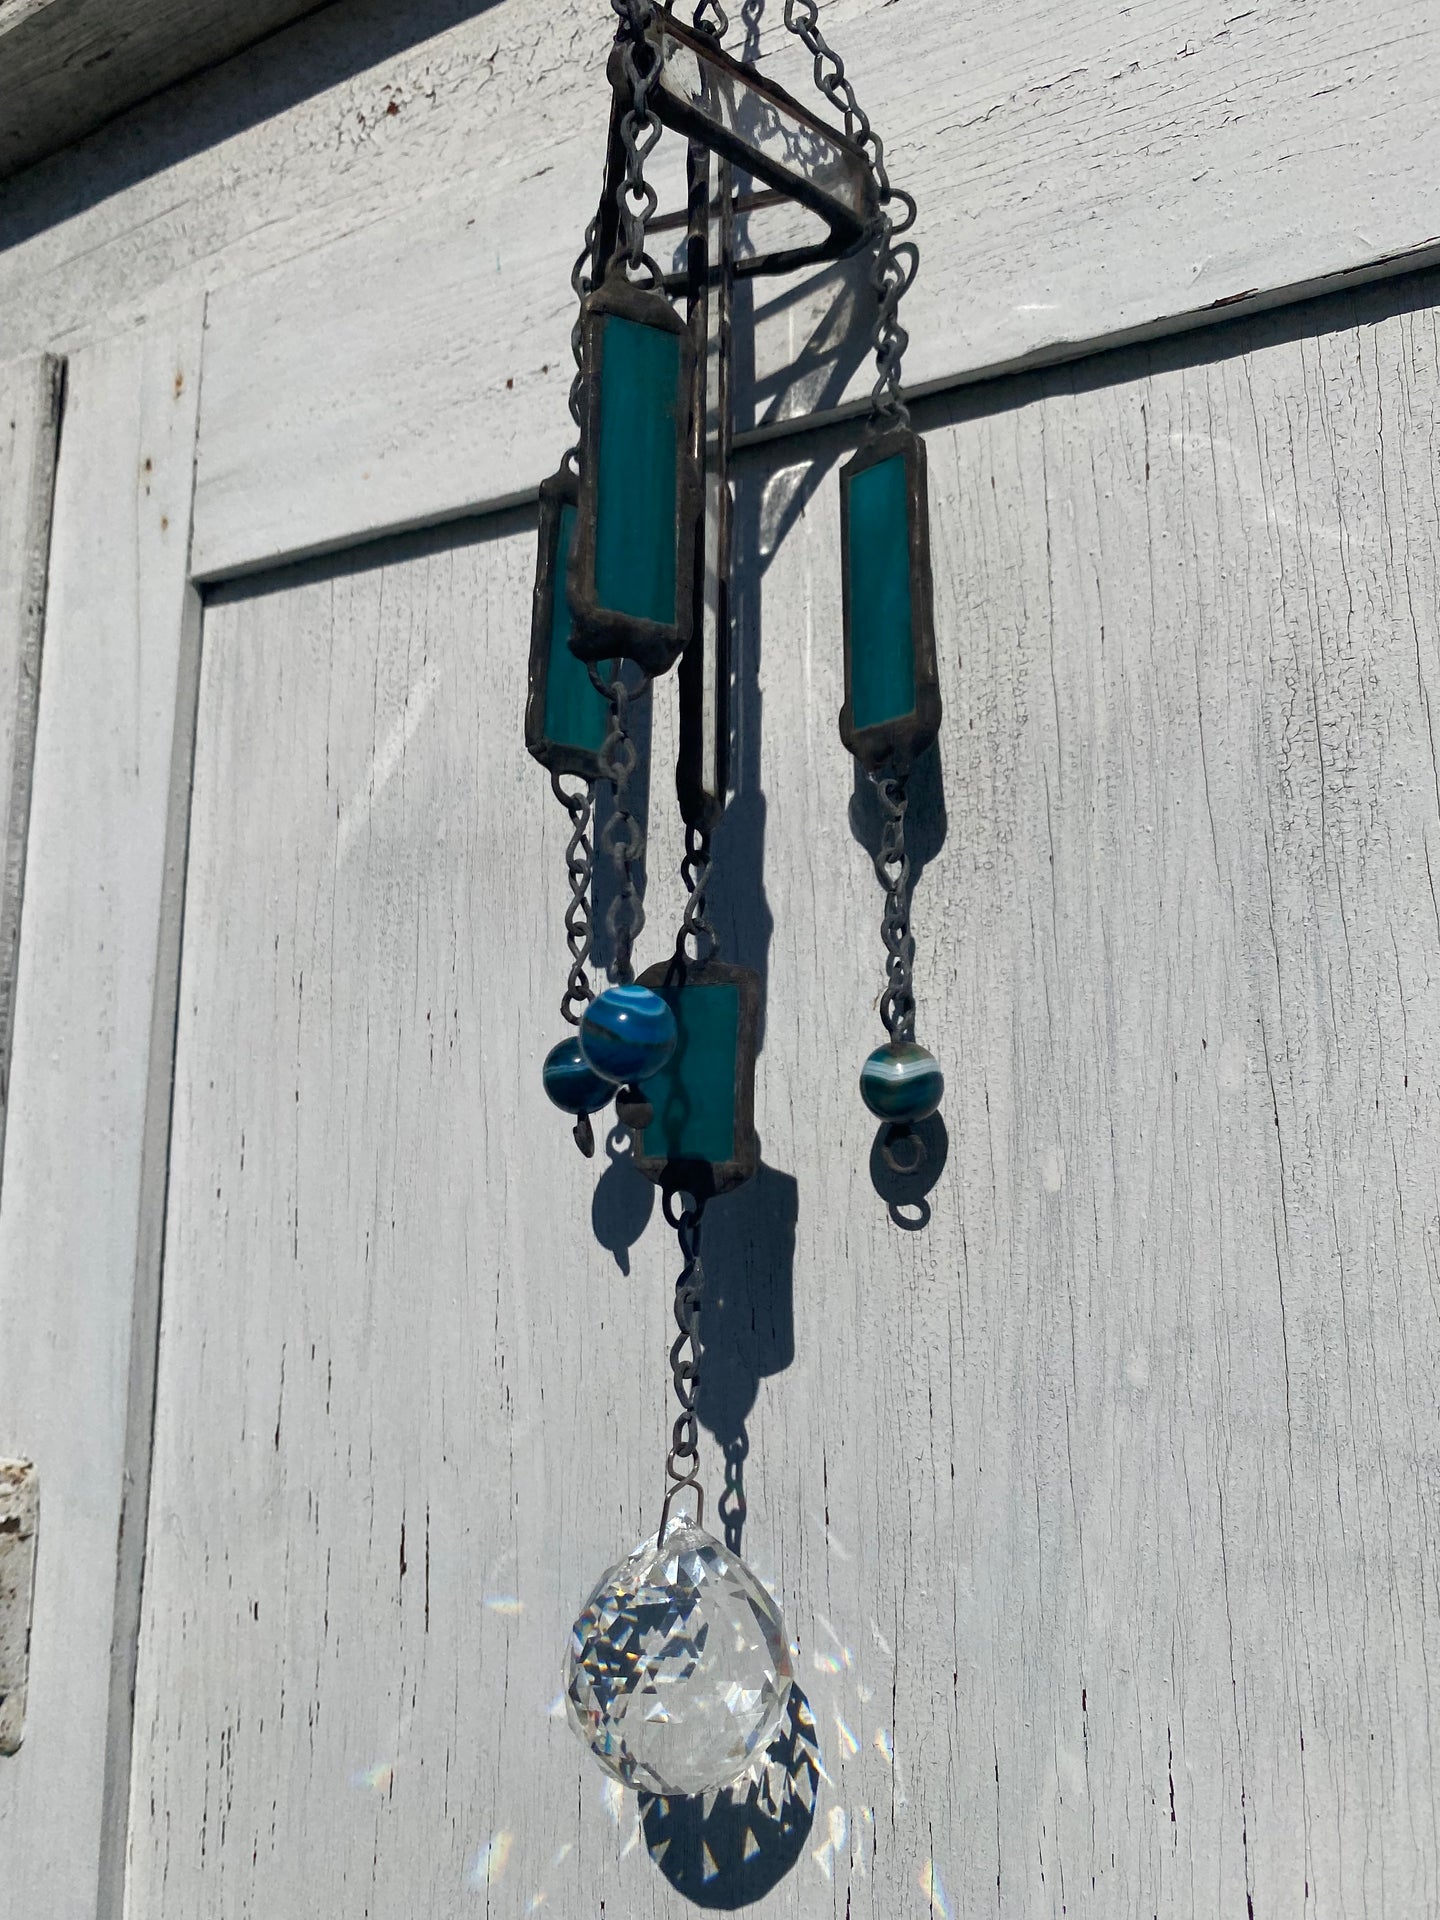 Turquoise crystal ball wind chime